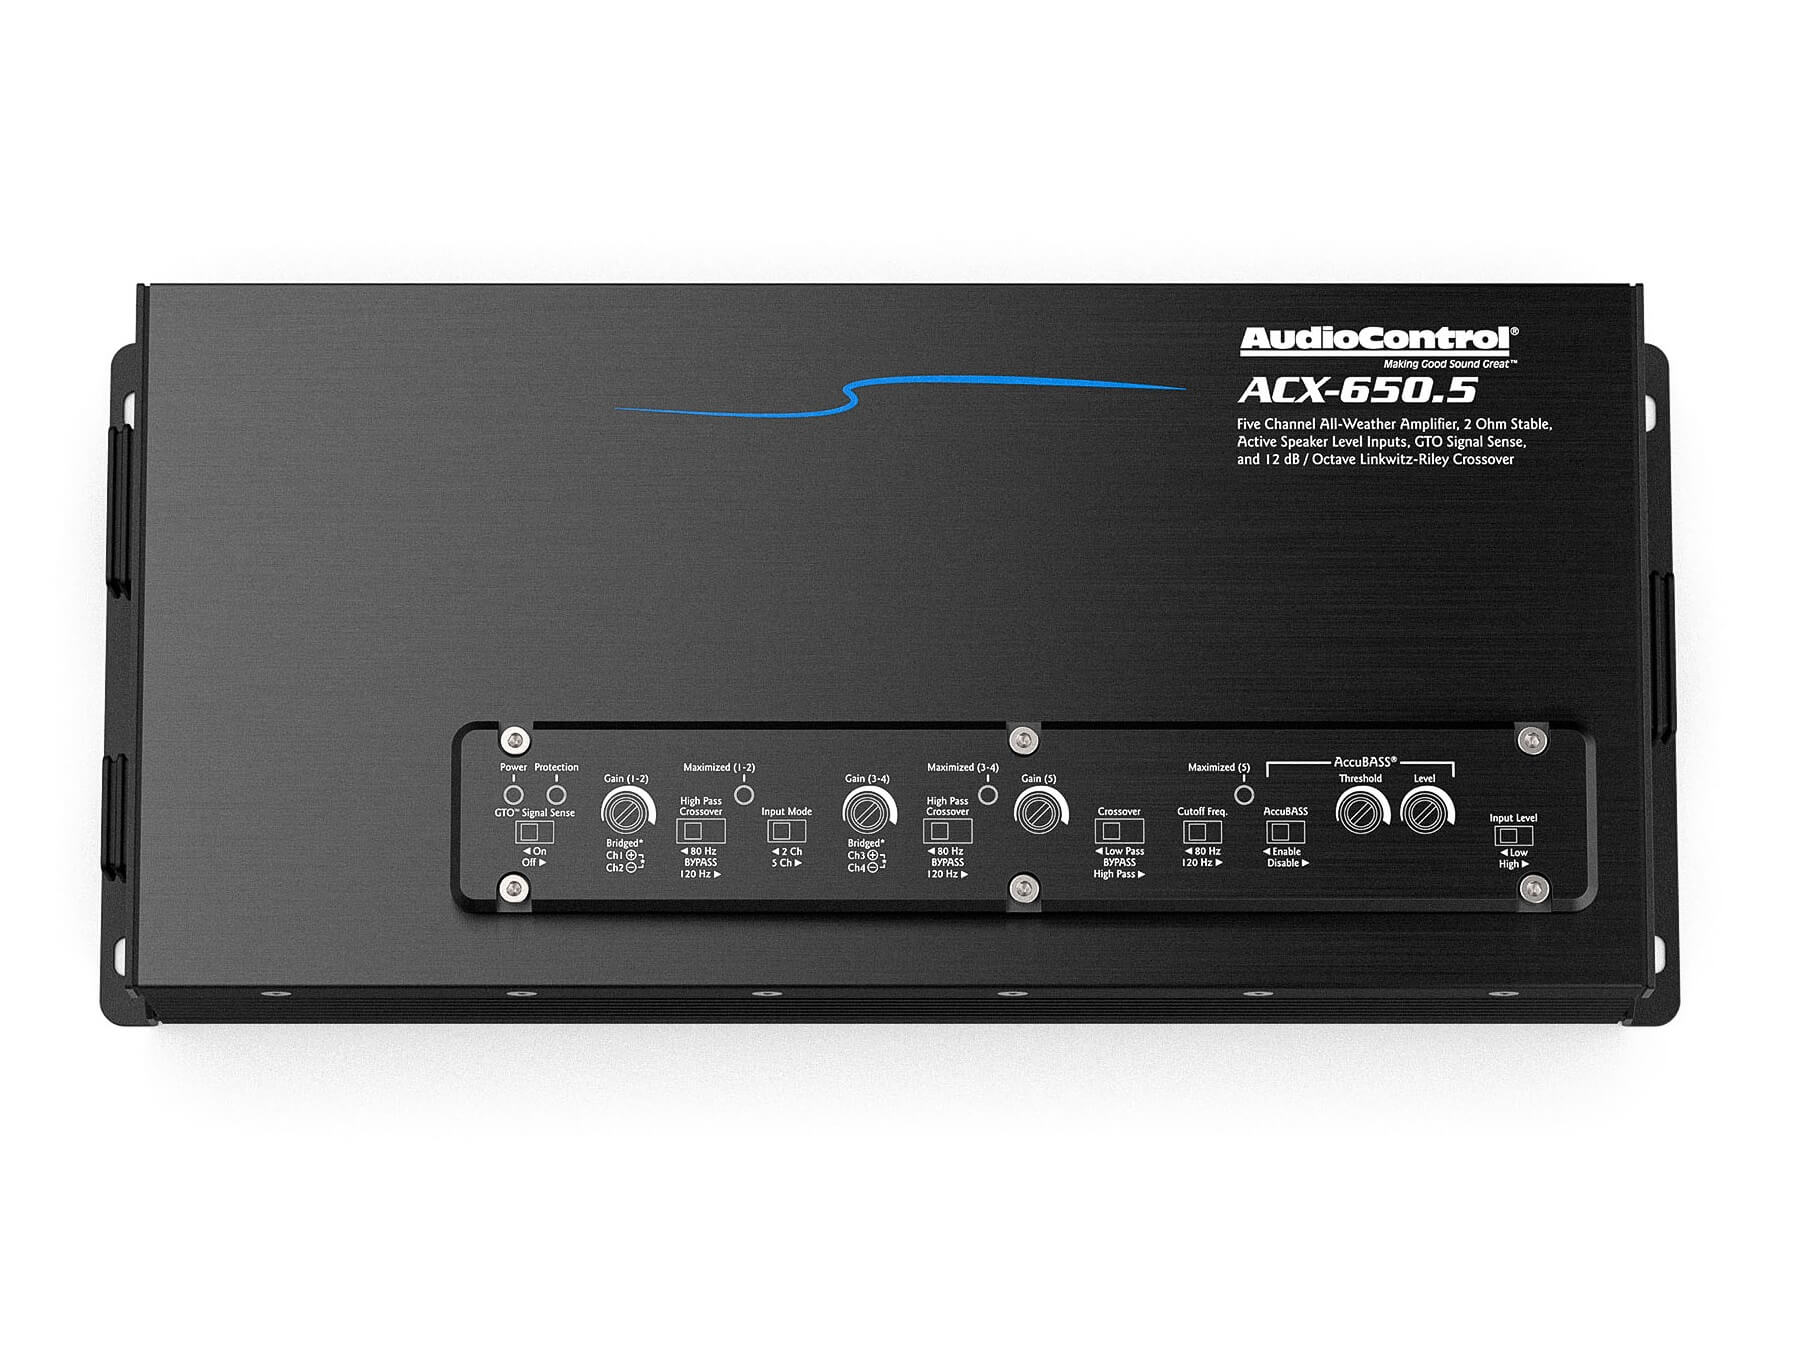 AudioControl ACX-650.5 - Top / With Cover